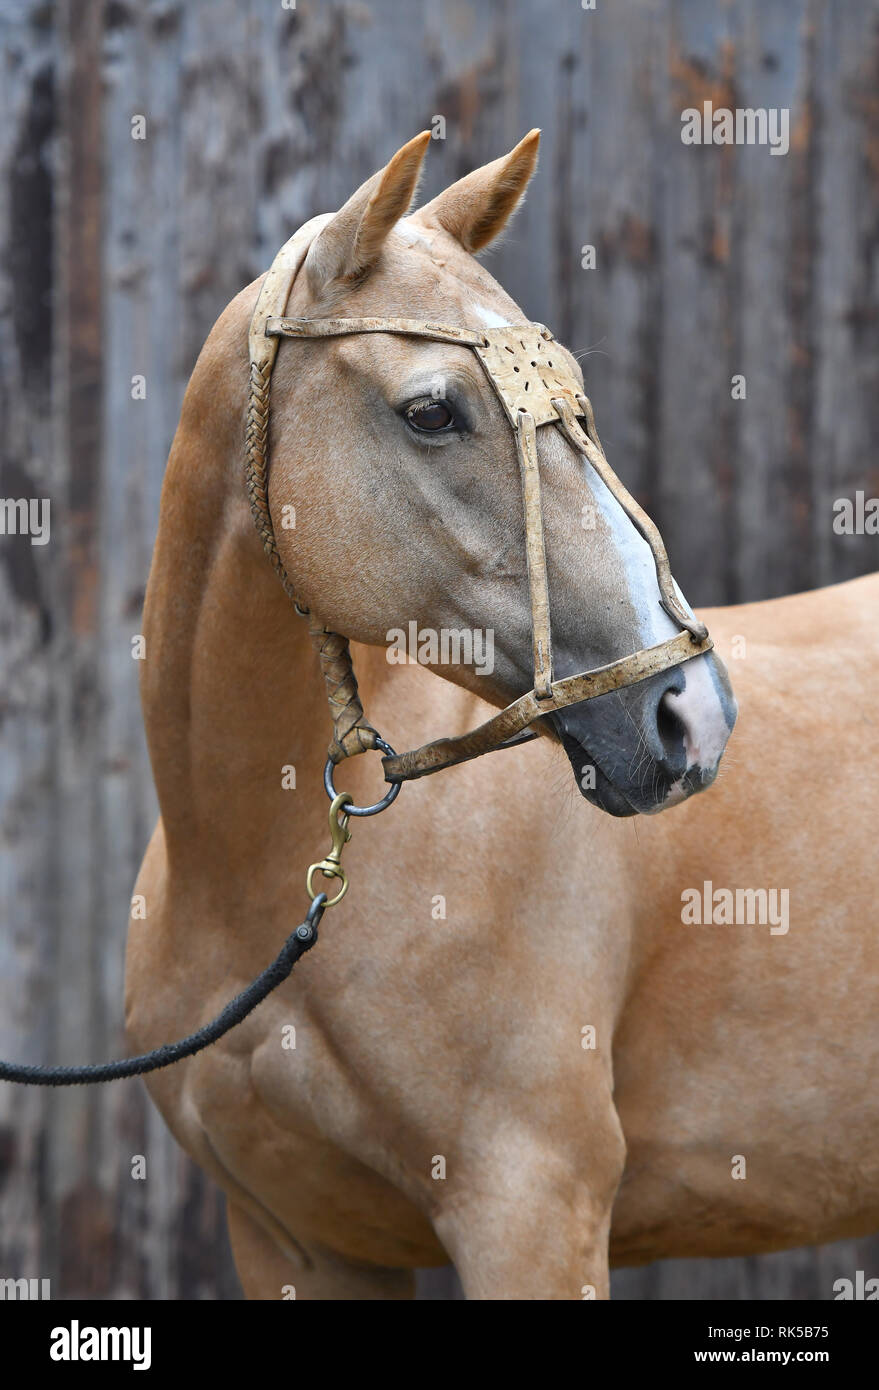 Palomino horse in leather polo halter looks sideways while standing beside wooden log wall. Vertical, sideways, portrait. Stock Photo